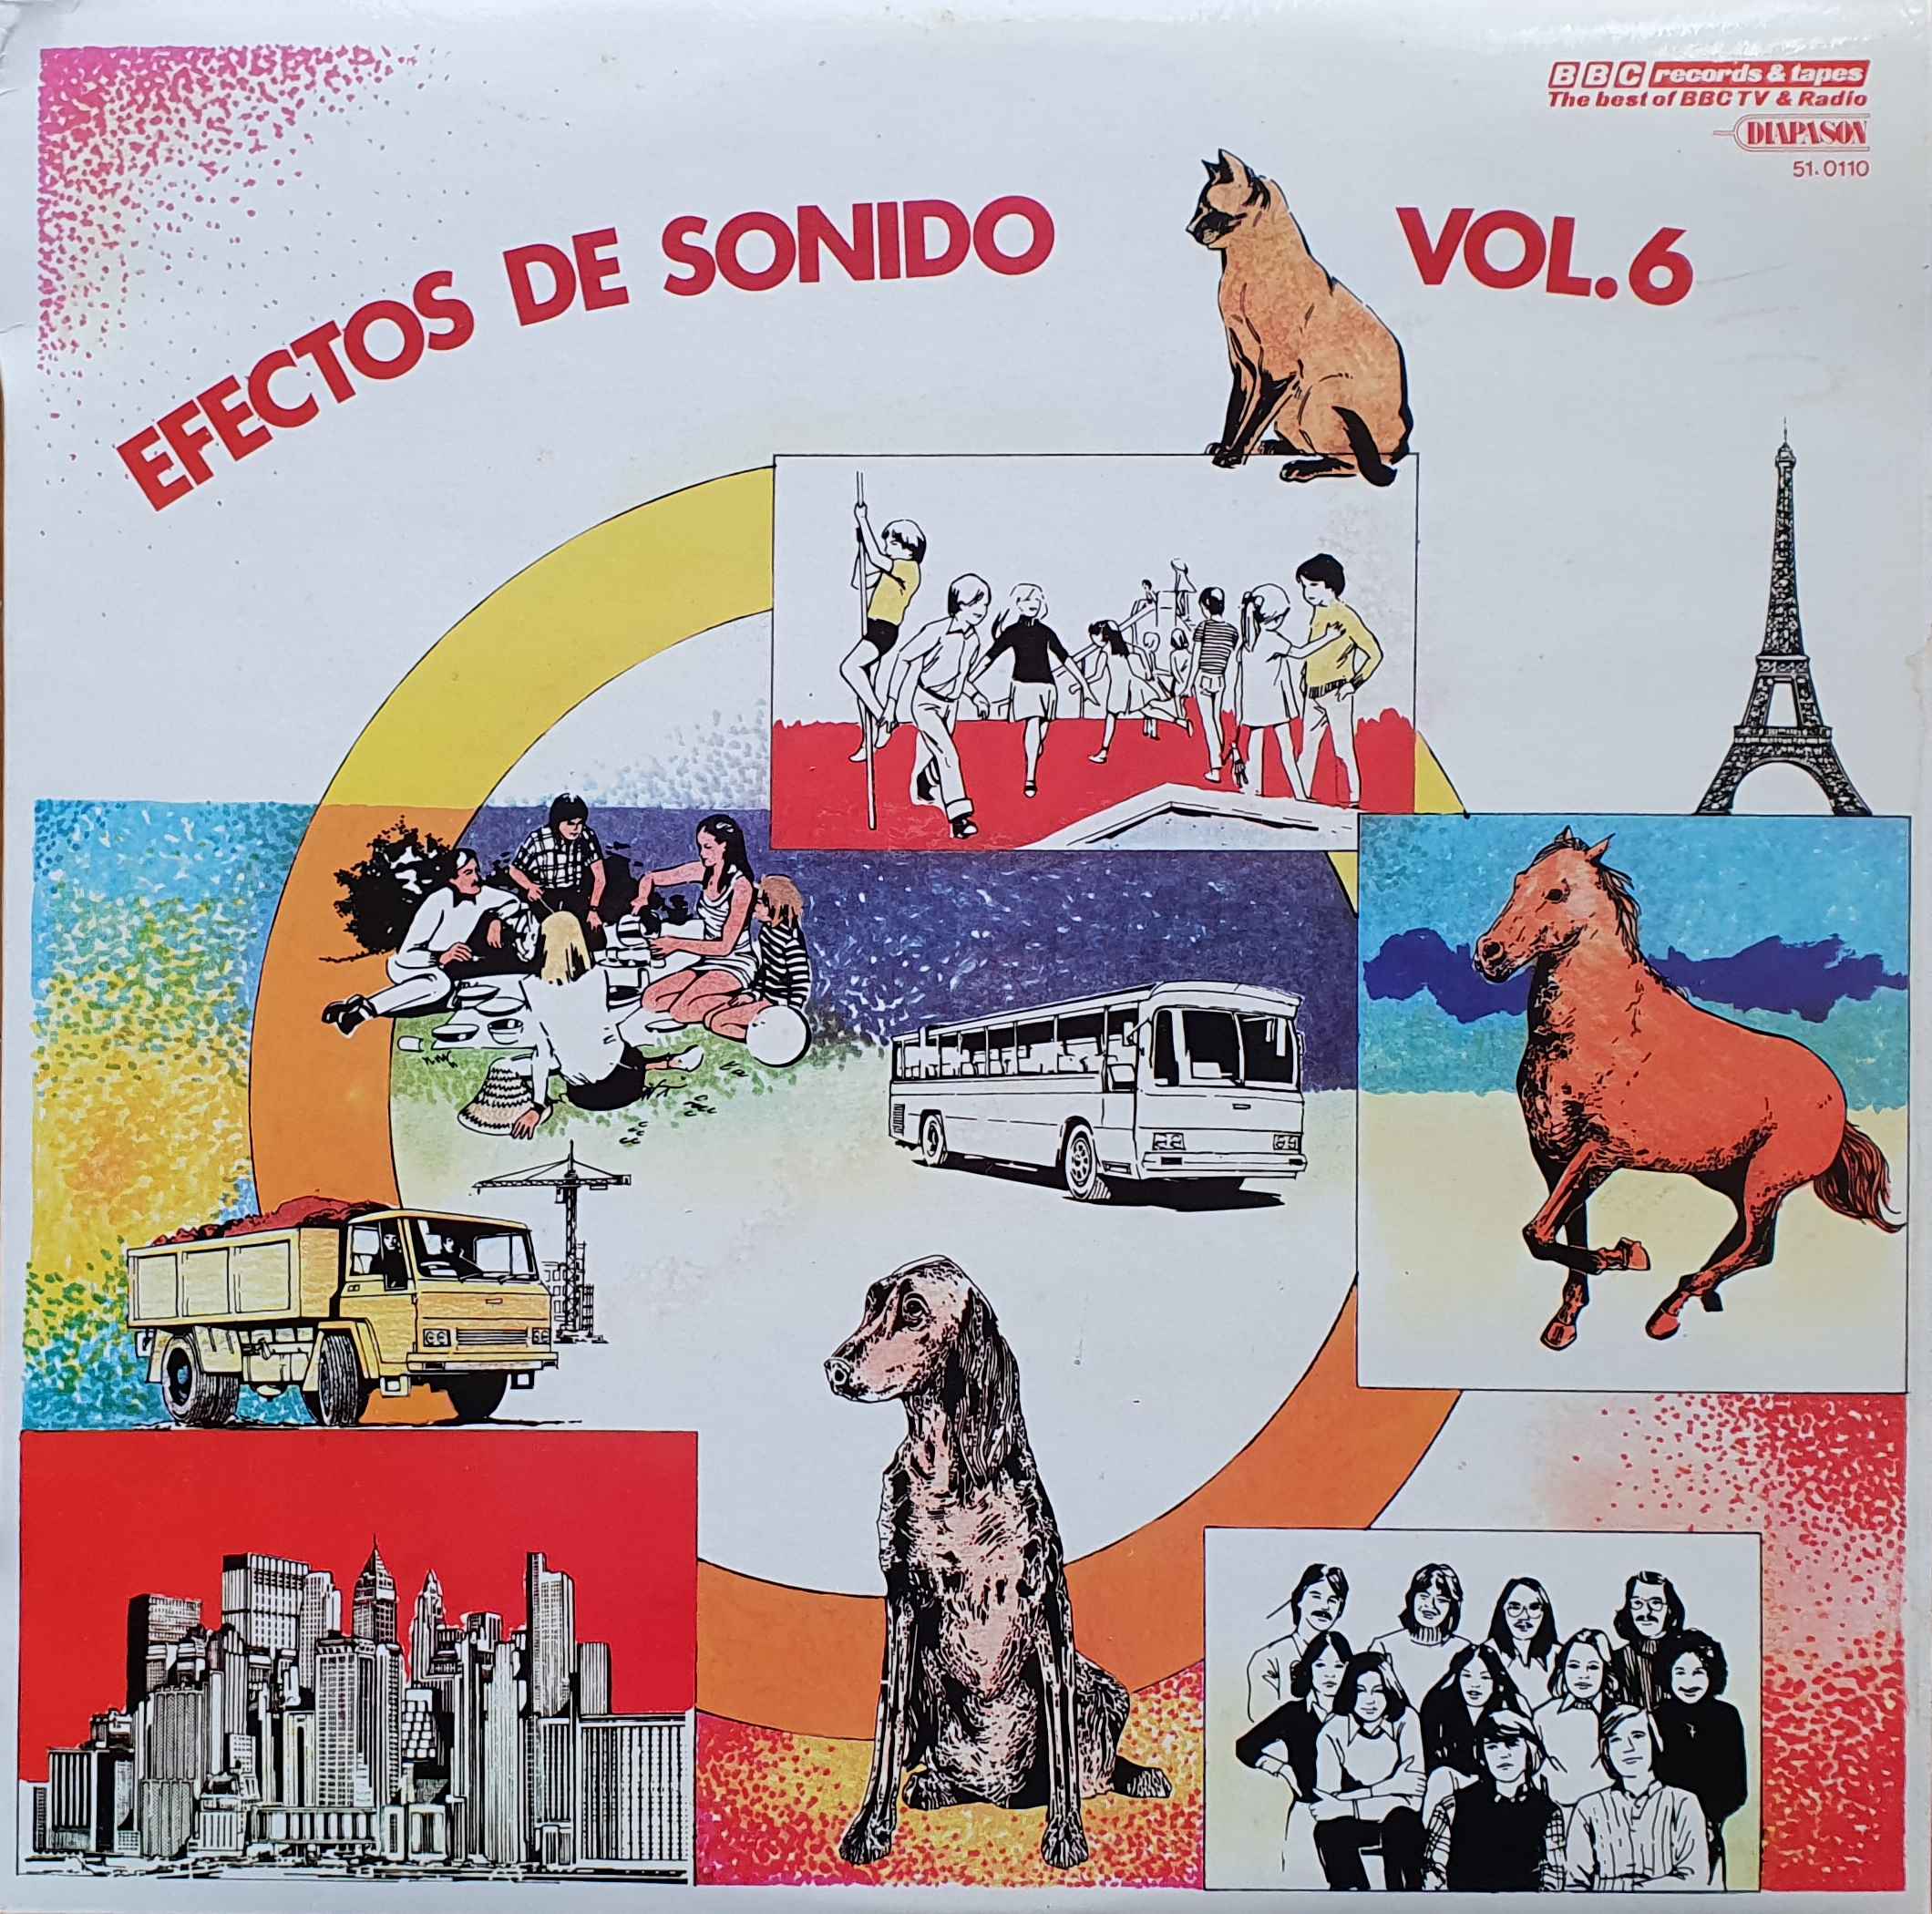 Picture of 51.0110 Efectos de sonido No 6 by artist Various from the BBC albums - Records and Tapes library